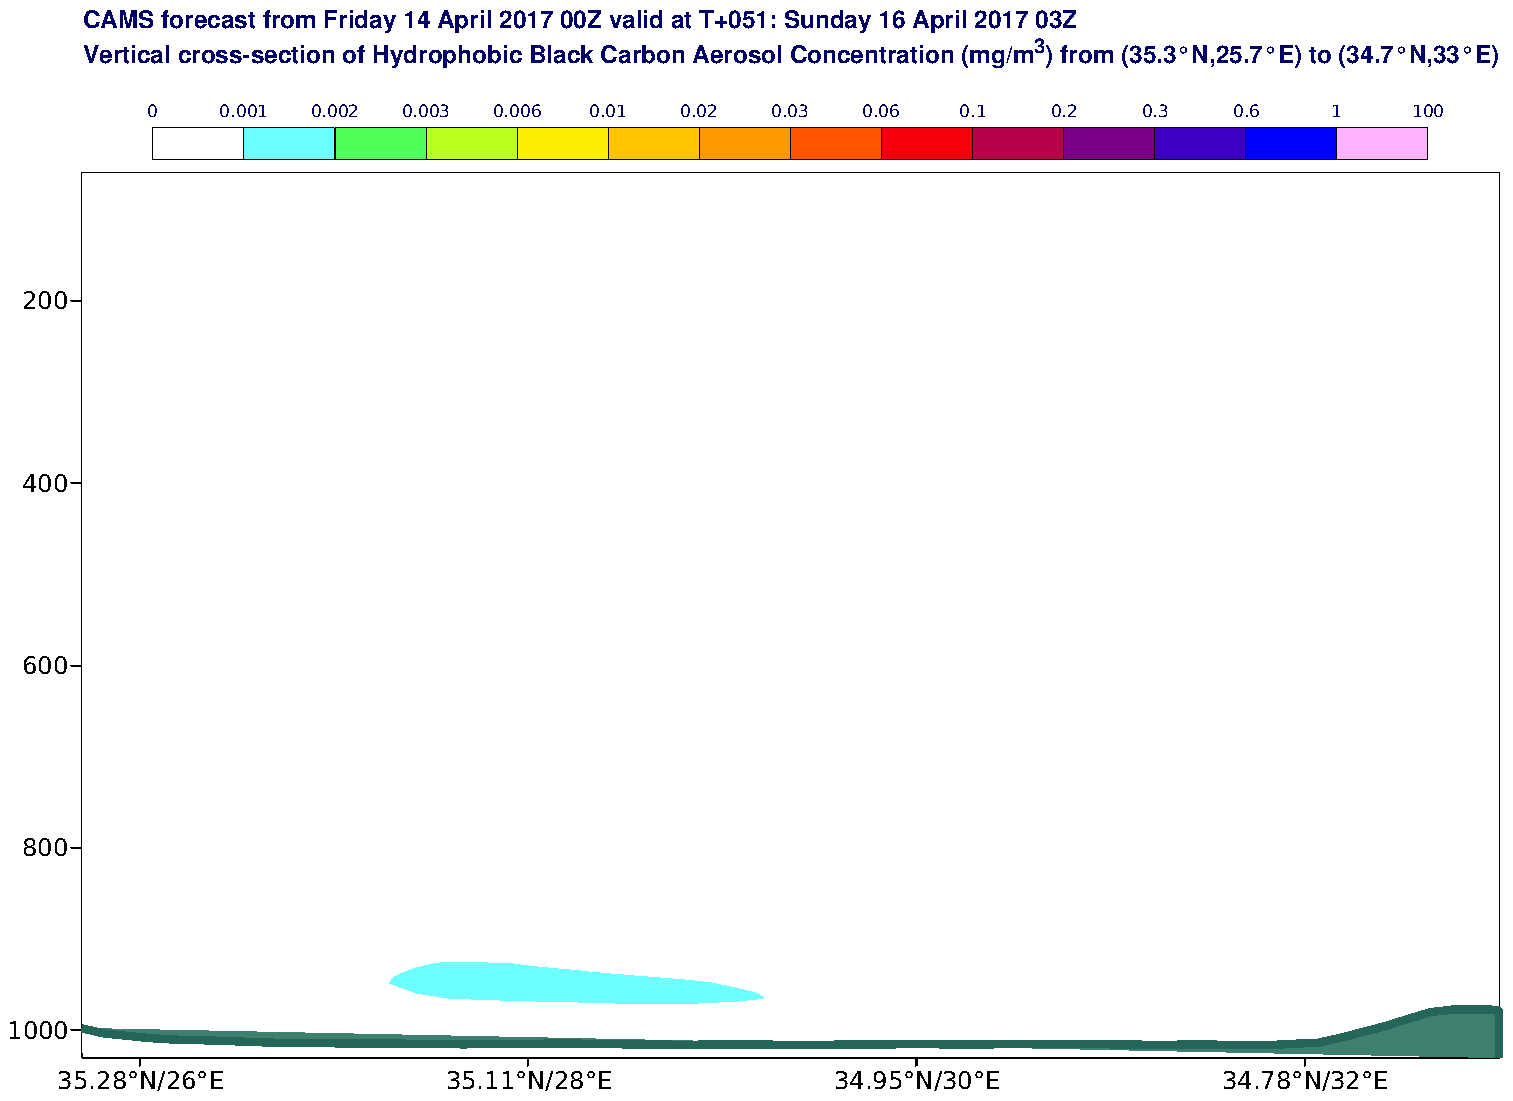 Vertical cross-section of Hydrophobic Black Carbon Aerosol Concentration (mg/m3) valid at T51 - 2017-04-16 03:00